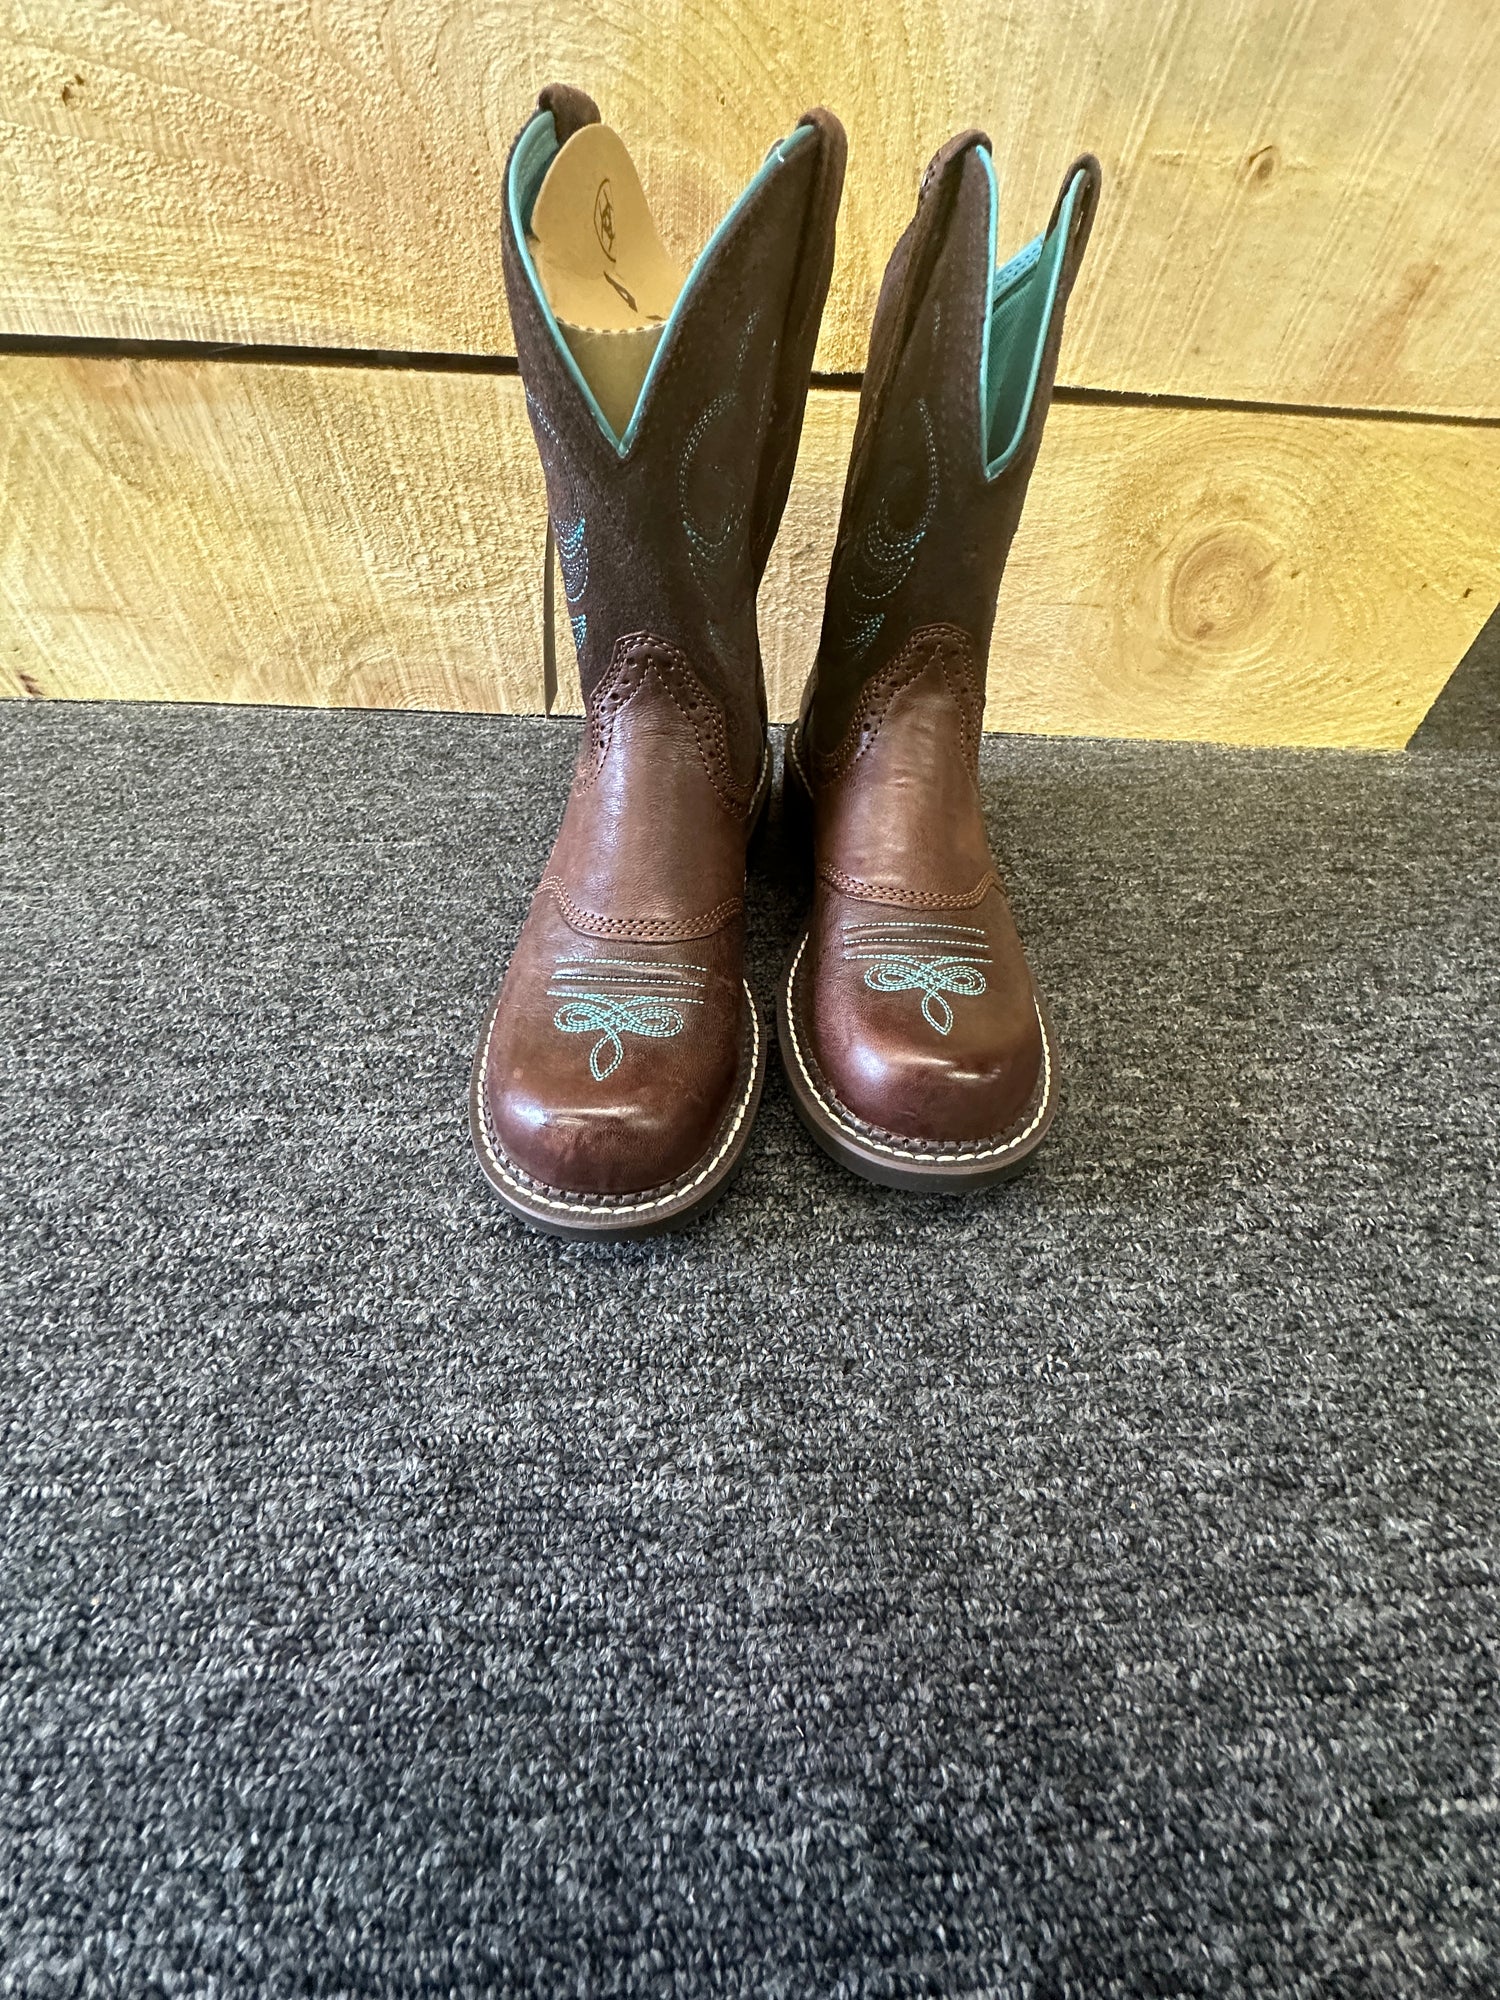 Boots - Women's Ariat Western Boots - New Size 8.5